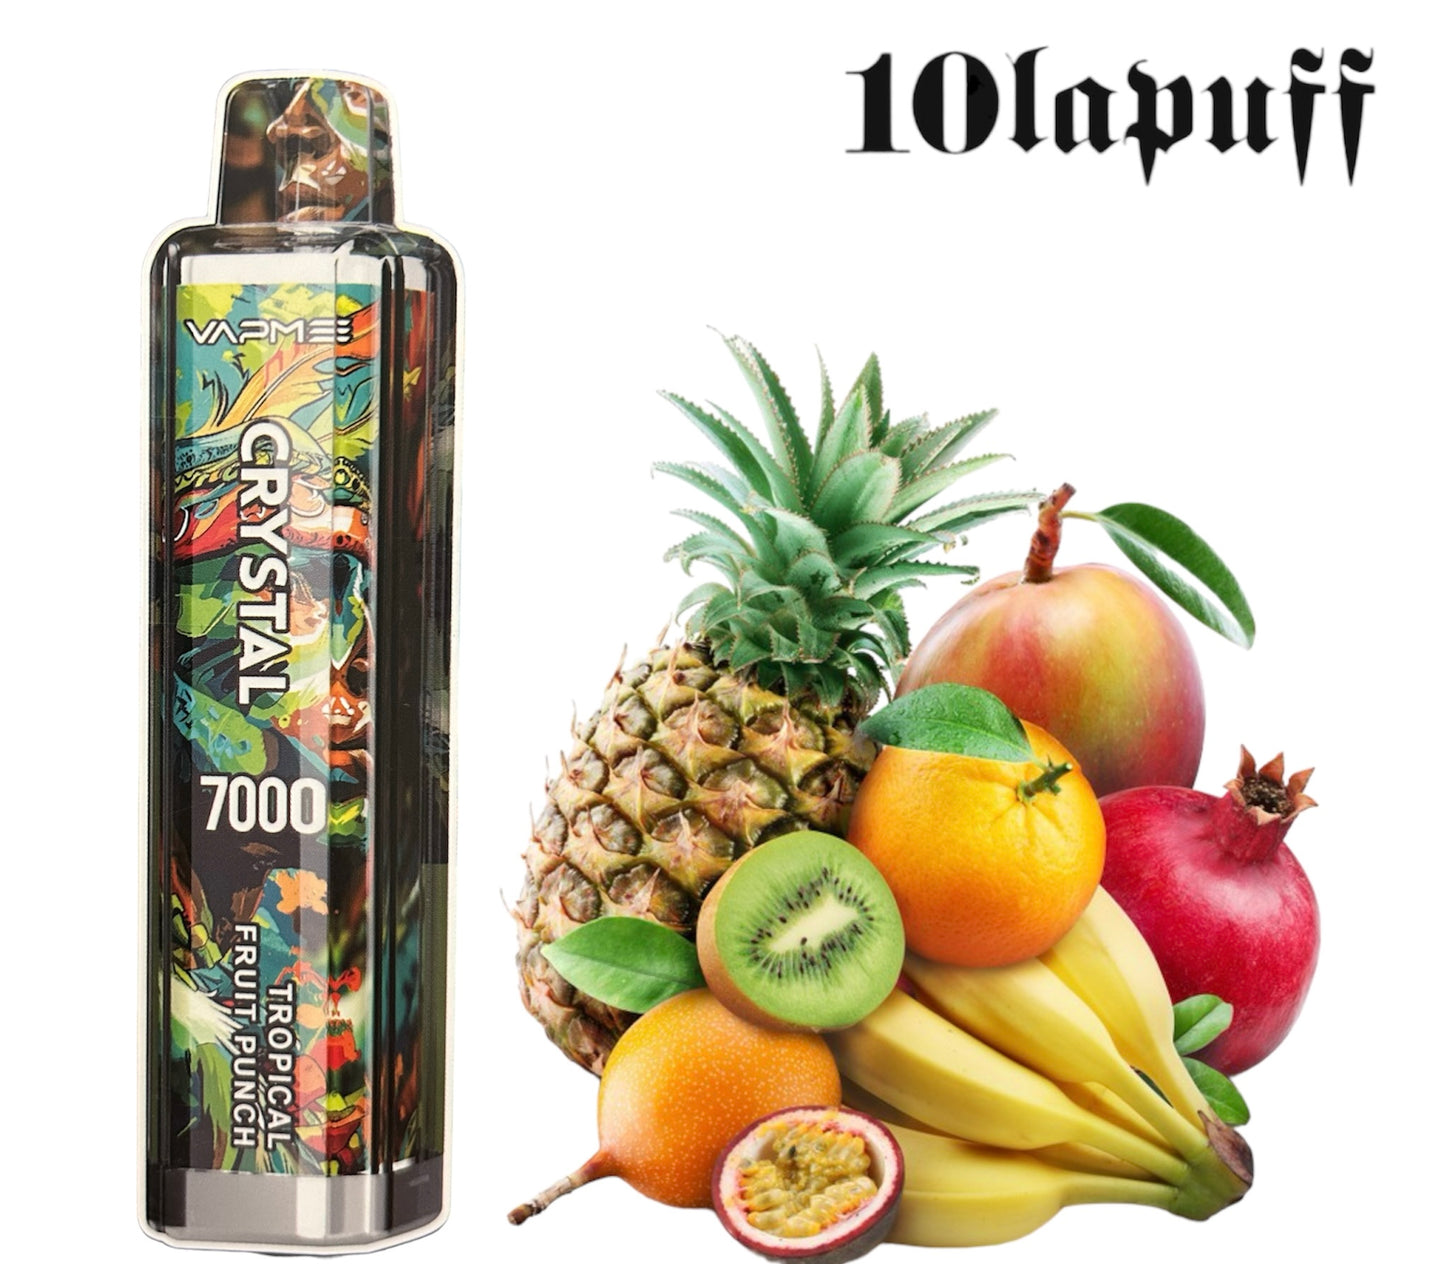 PUFF 7000 VAPME crystal - Tropical Fruits Punch